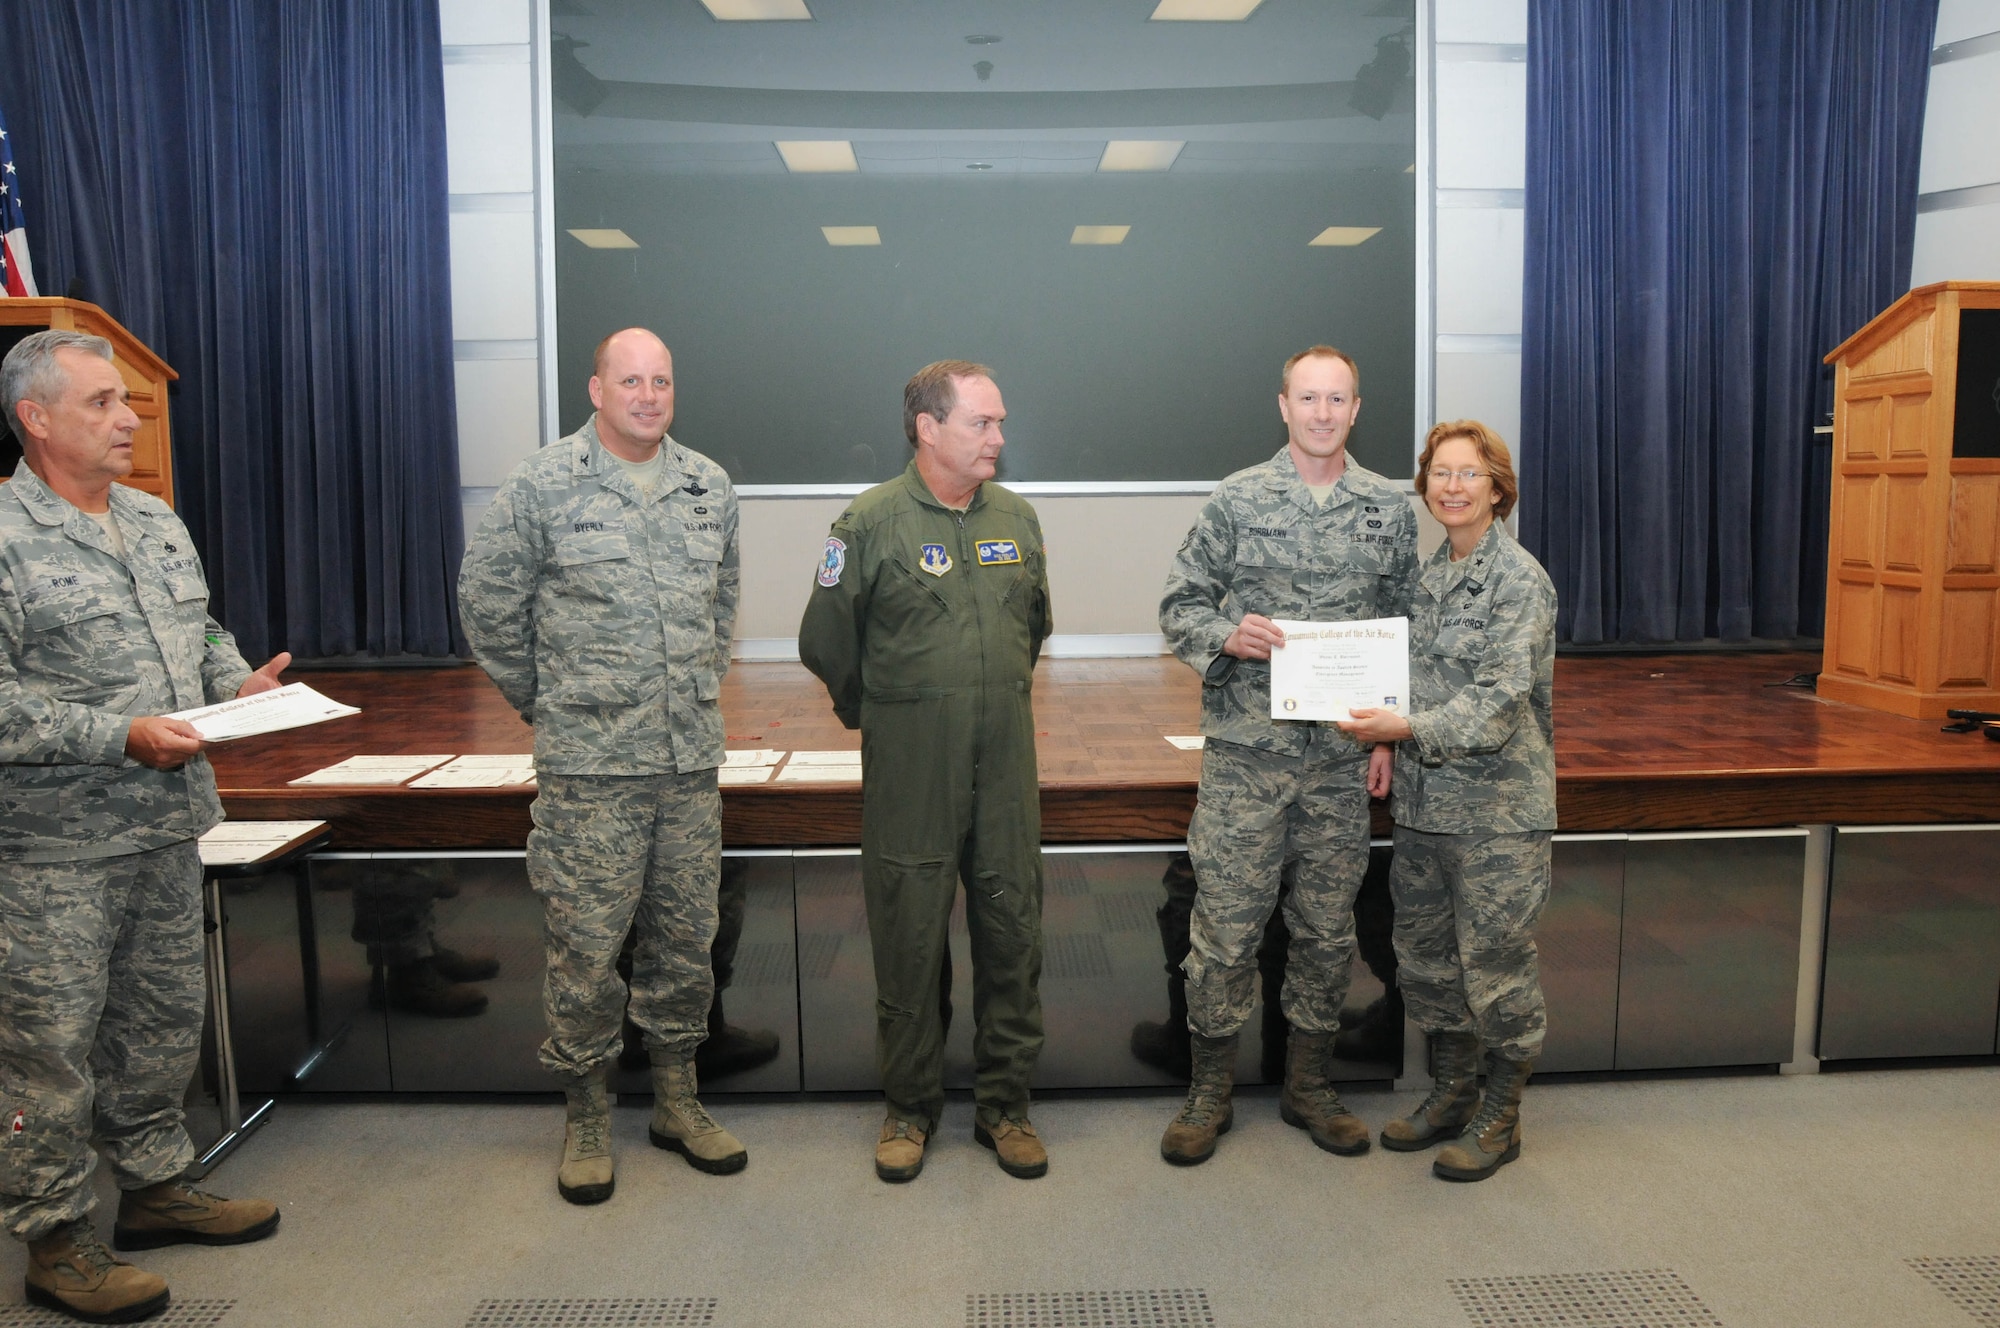 U.S. Air Force Staff Sgt. Wayne Borrmann, second from right, a member of the 166th Civil Engineer Squadron, 166th Airlift Wing, receives a certificate from Brig. Gen. Carol Timmons, assistant adjutant general for air, Delaware National Guard to recognize Borrmann’s attainment of a Community College of the Air Force associate of applied science degree in emergency management at a CCAF Class of October 2013 graduation ceremony held Nov. 3, 2013 at the New Castle Air National Guard Base, Del. 166th AW Commander Col. Mike Feeley, center, is next to 166th AW Vice-Commander Col. Dave Byerly, followed by 166th AW Command Chief Master Sgt. Henry Rome (left). (U.S. Air National Guard photo by Tech. Sgt. Robin Meredith)